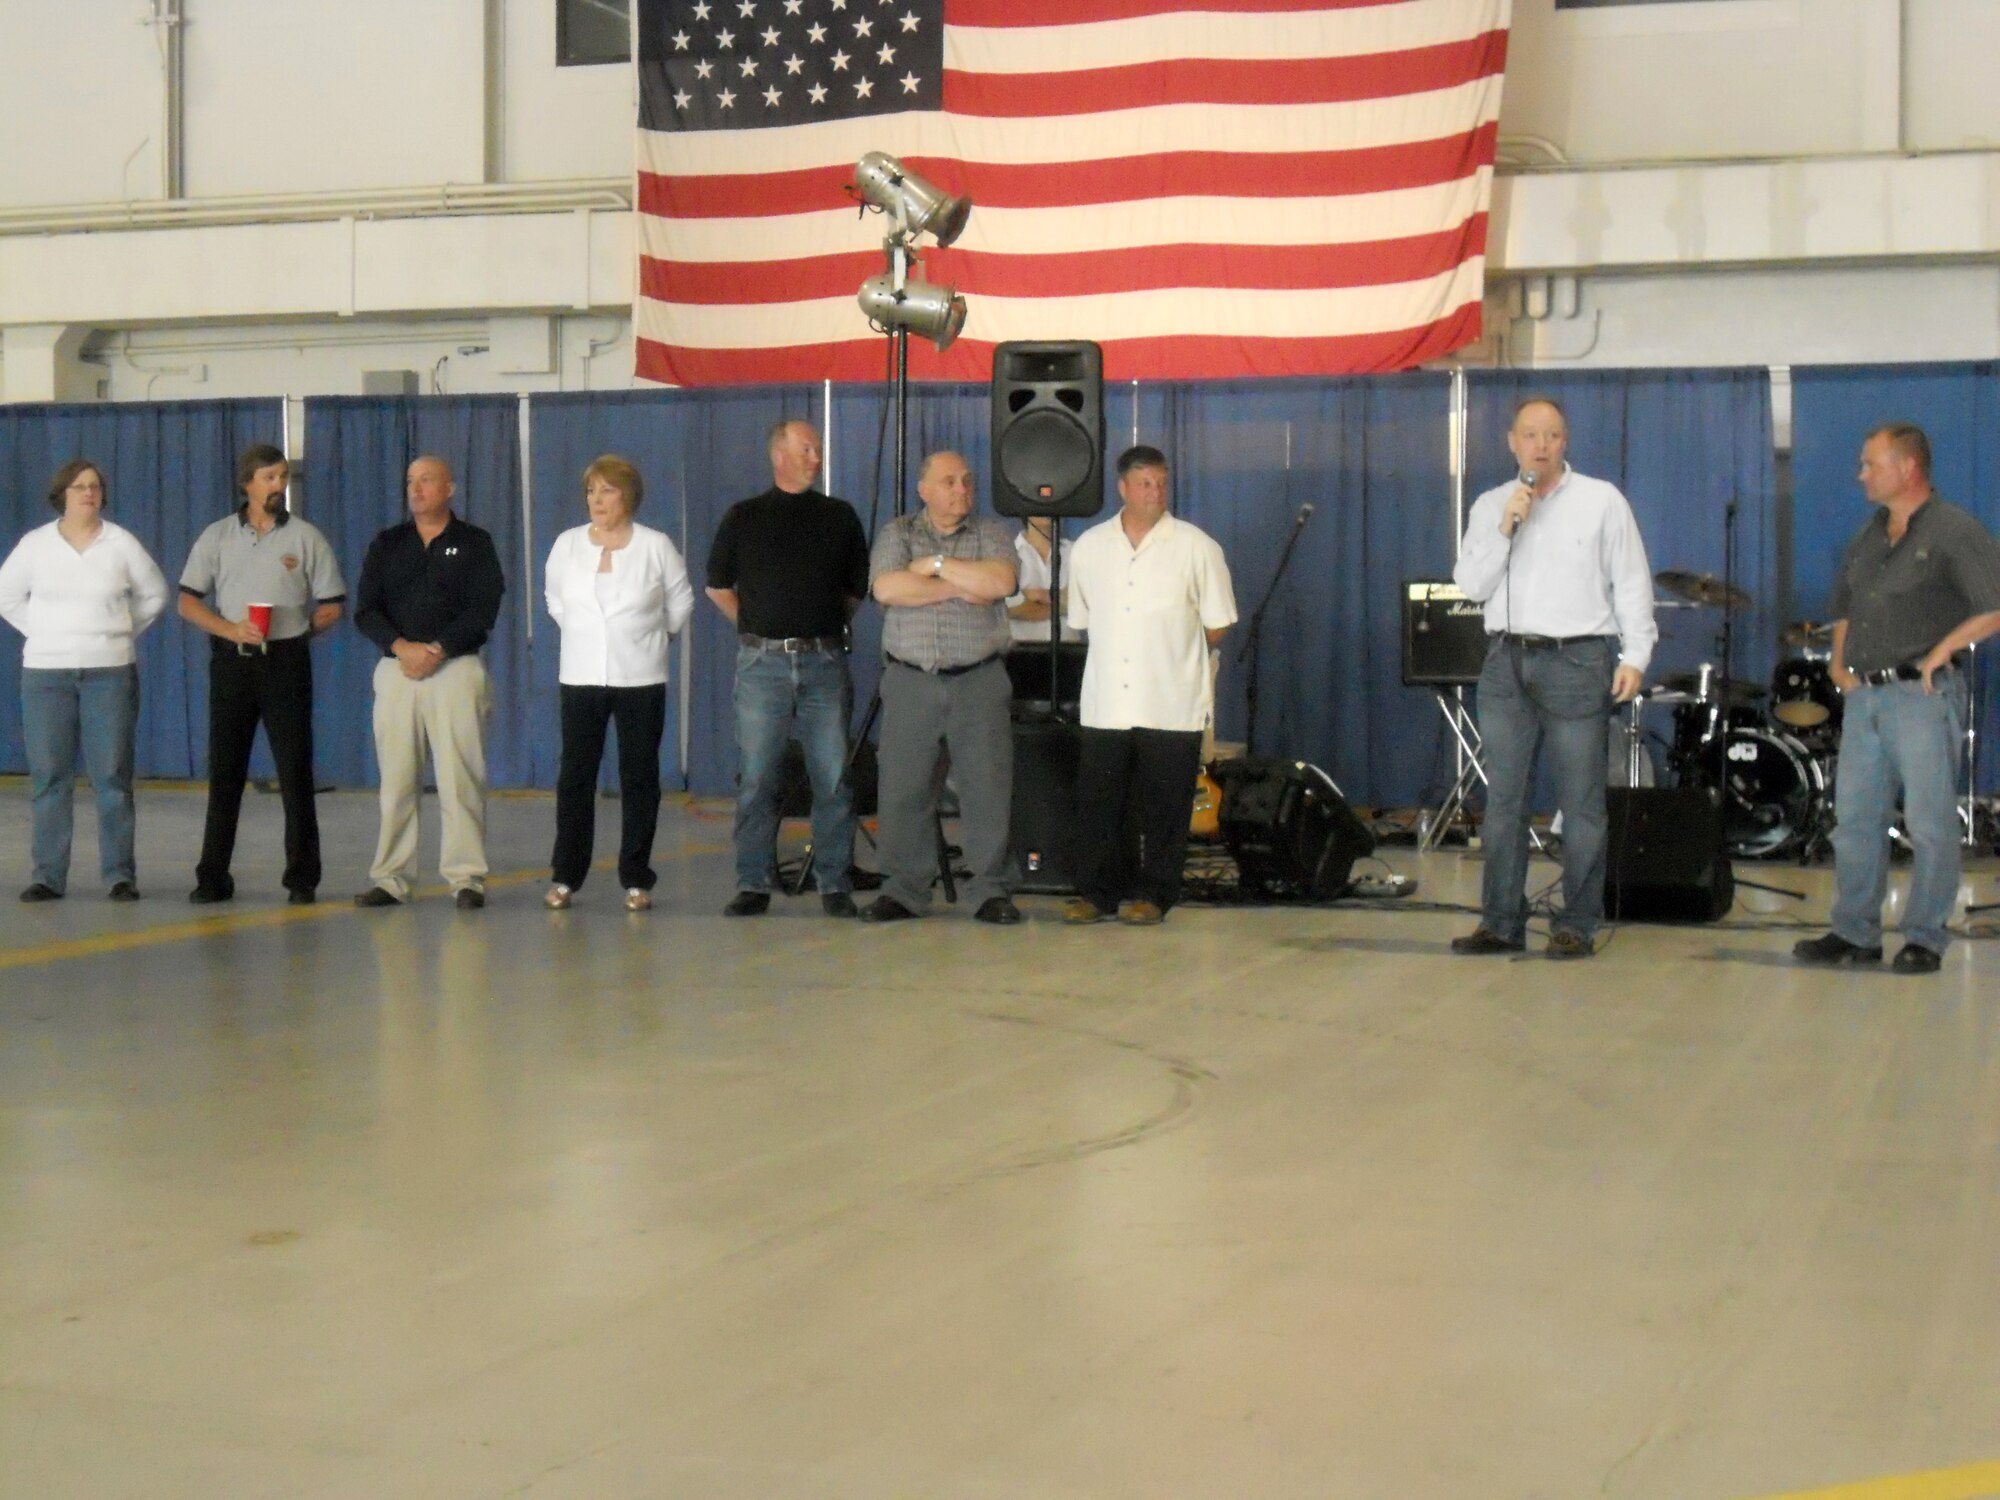 U.S. Air Force Col. Kevin W. Bradley (second from right) expresses his gratitude to all the retiring chief master sergeants at Hancock Field Air National Guard Base in Syracuse NY, on 4 June 2011.  The Wing held a “Hail to the Chiefs” dinner and ceremony for all chiefs who have or will retire in 2010-11. (U.S. Air Force photo by Staff Sgt. Takeya Williams)